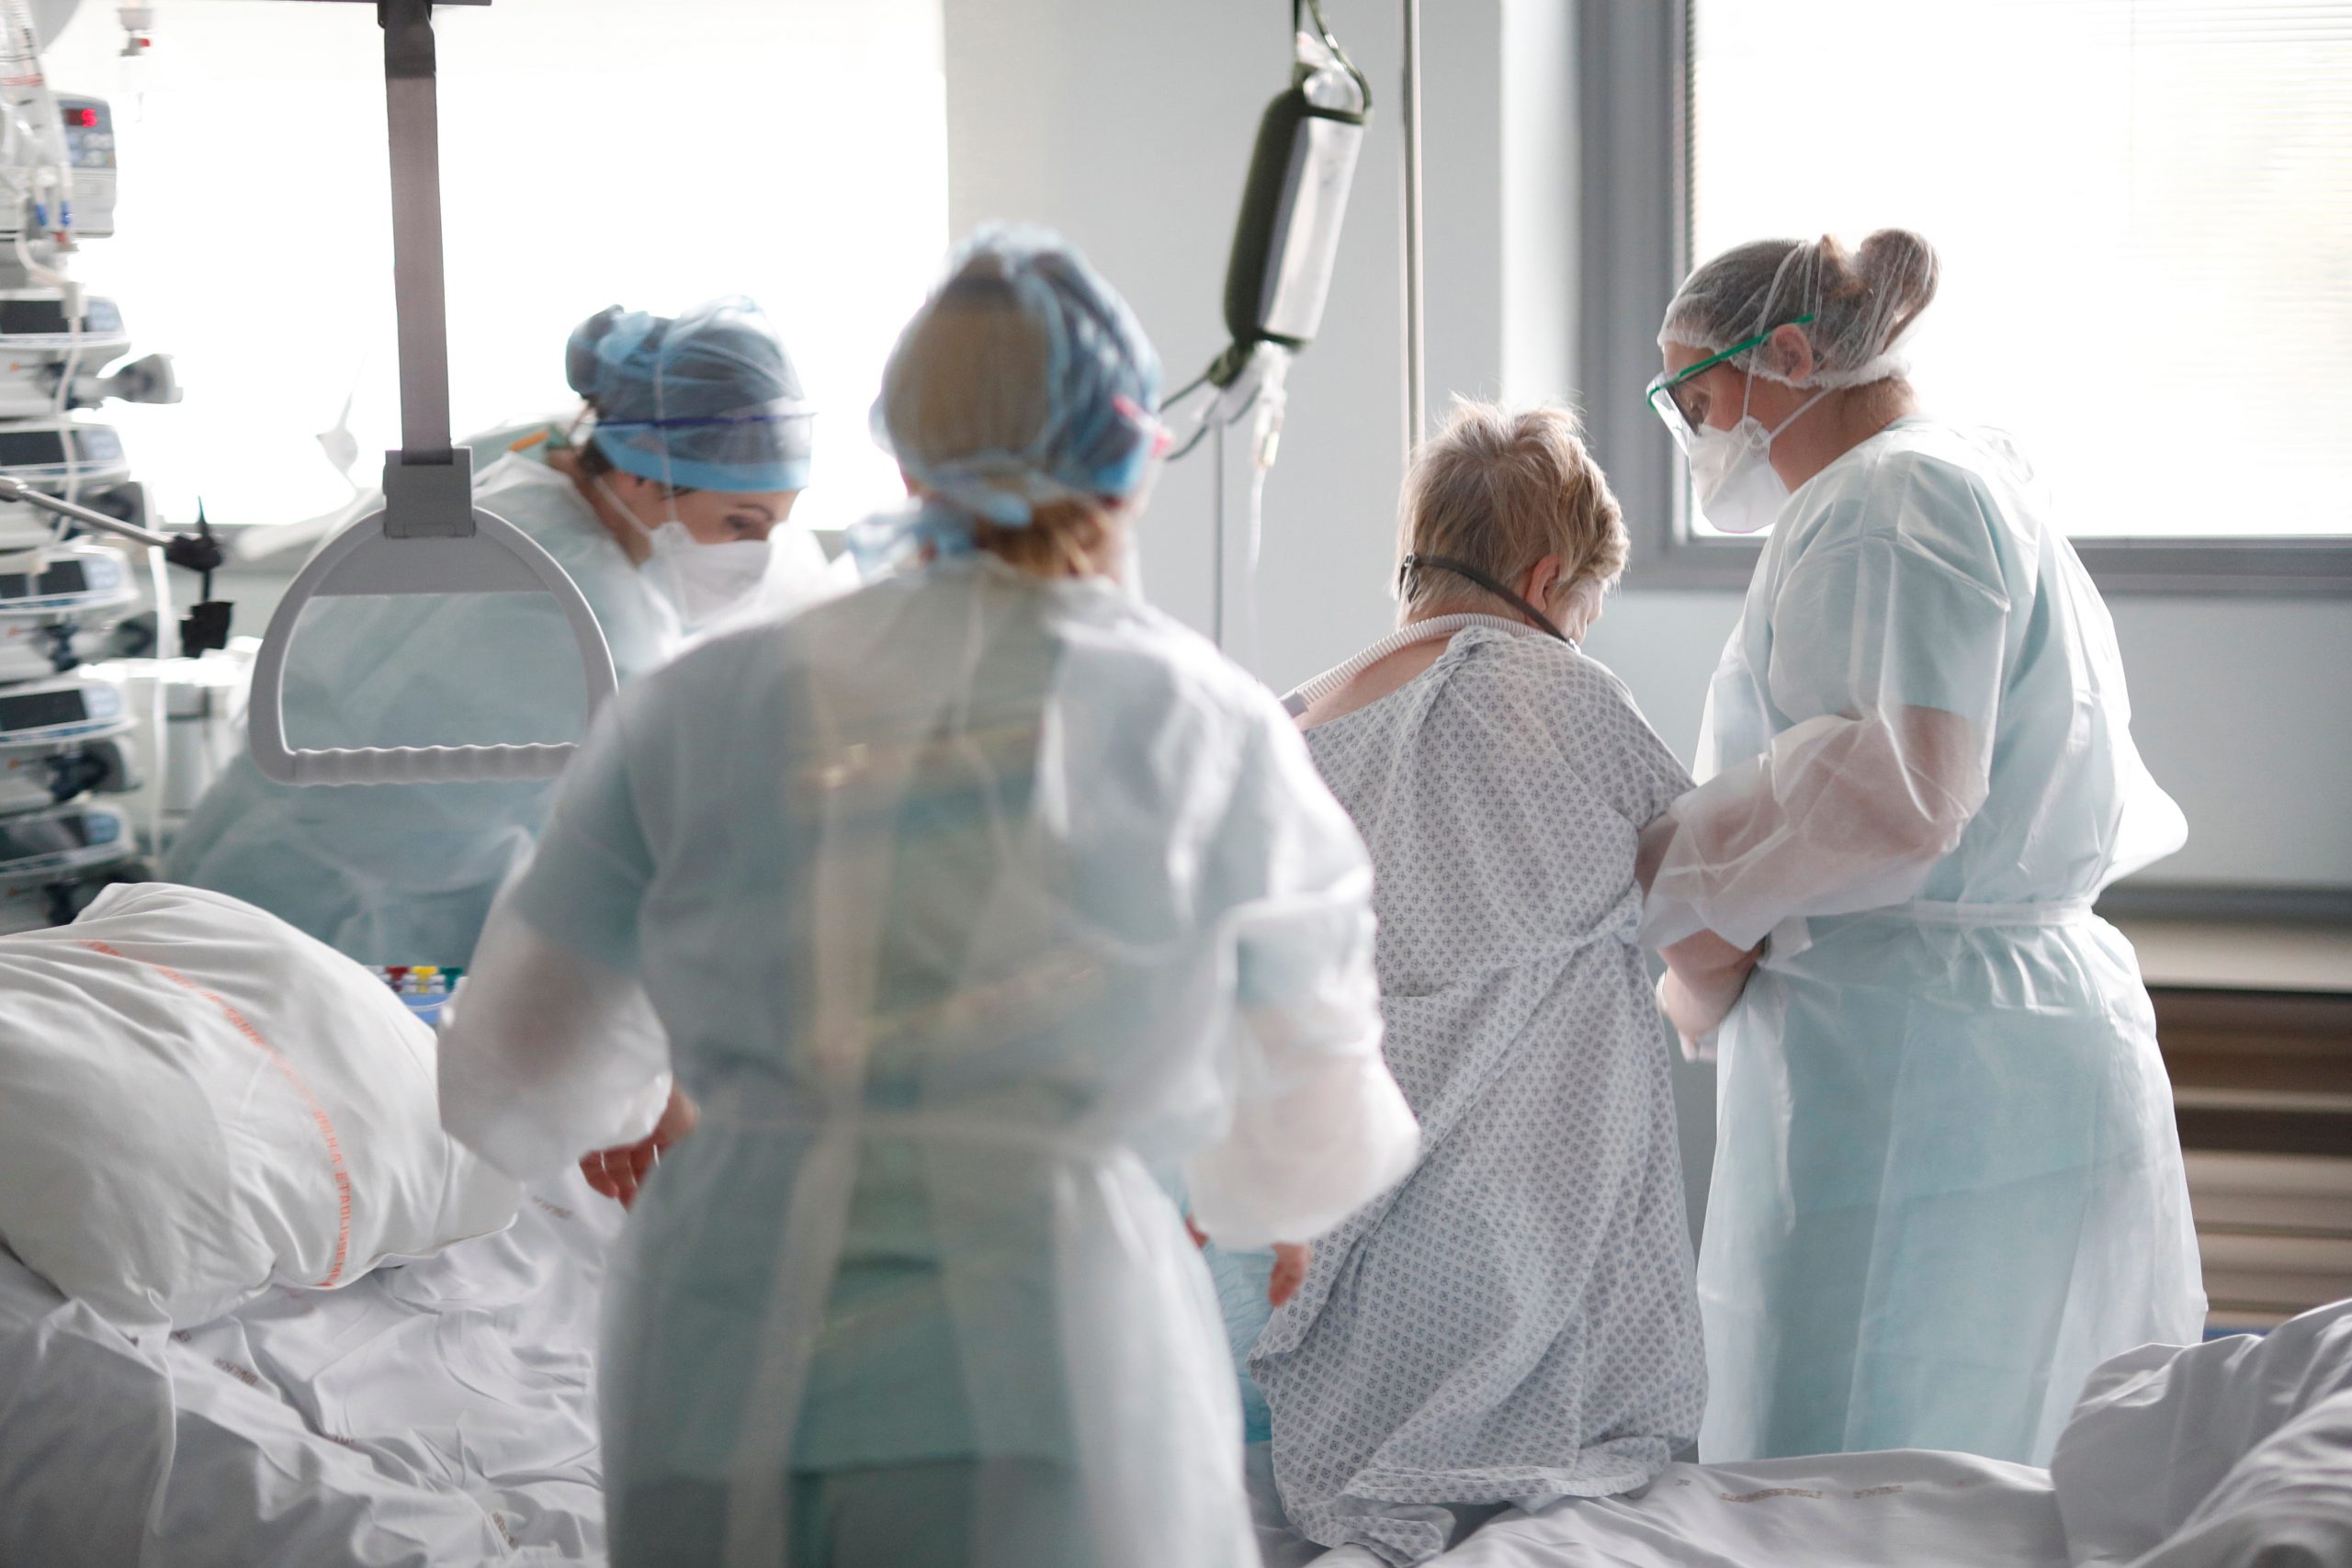 France plans to transfer patients to Germany as COVID-19 cases surge